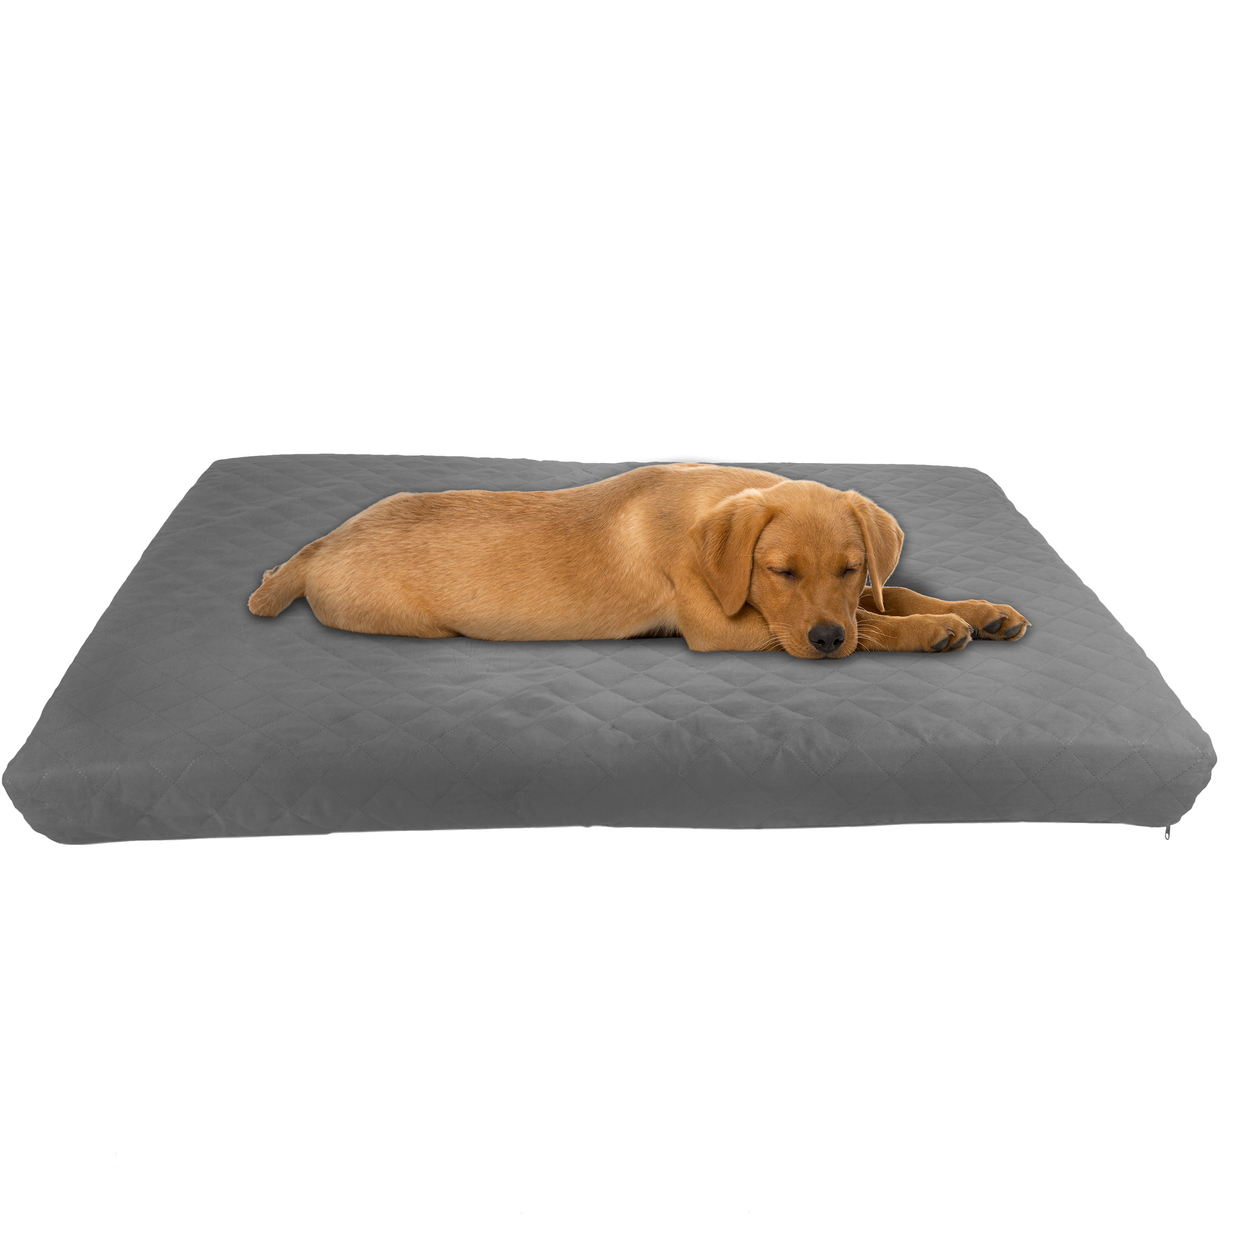 Waterproof Orthopedic Memory Foam Dog Pet Bed Washable Cover Non Slip Bottom - 44x35 Inches